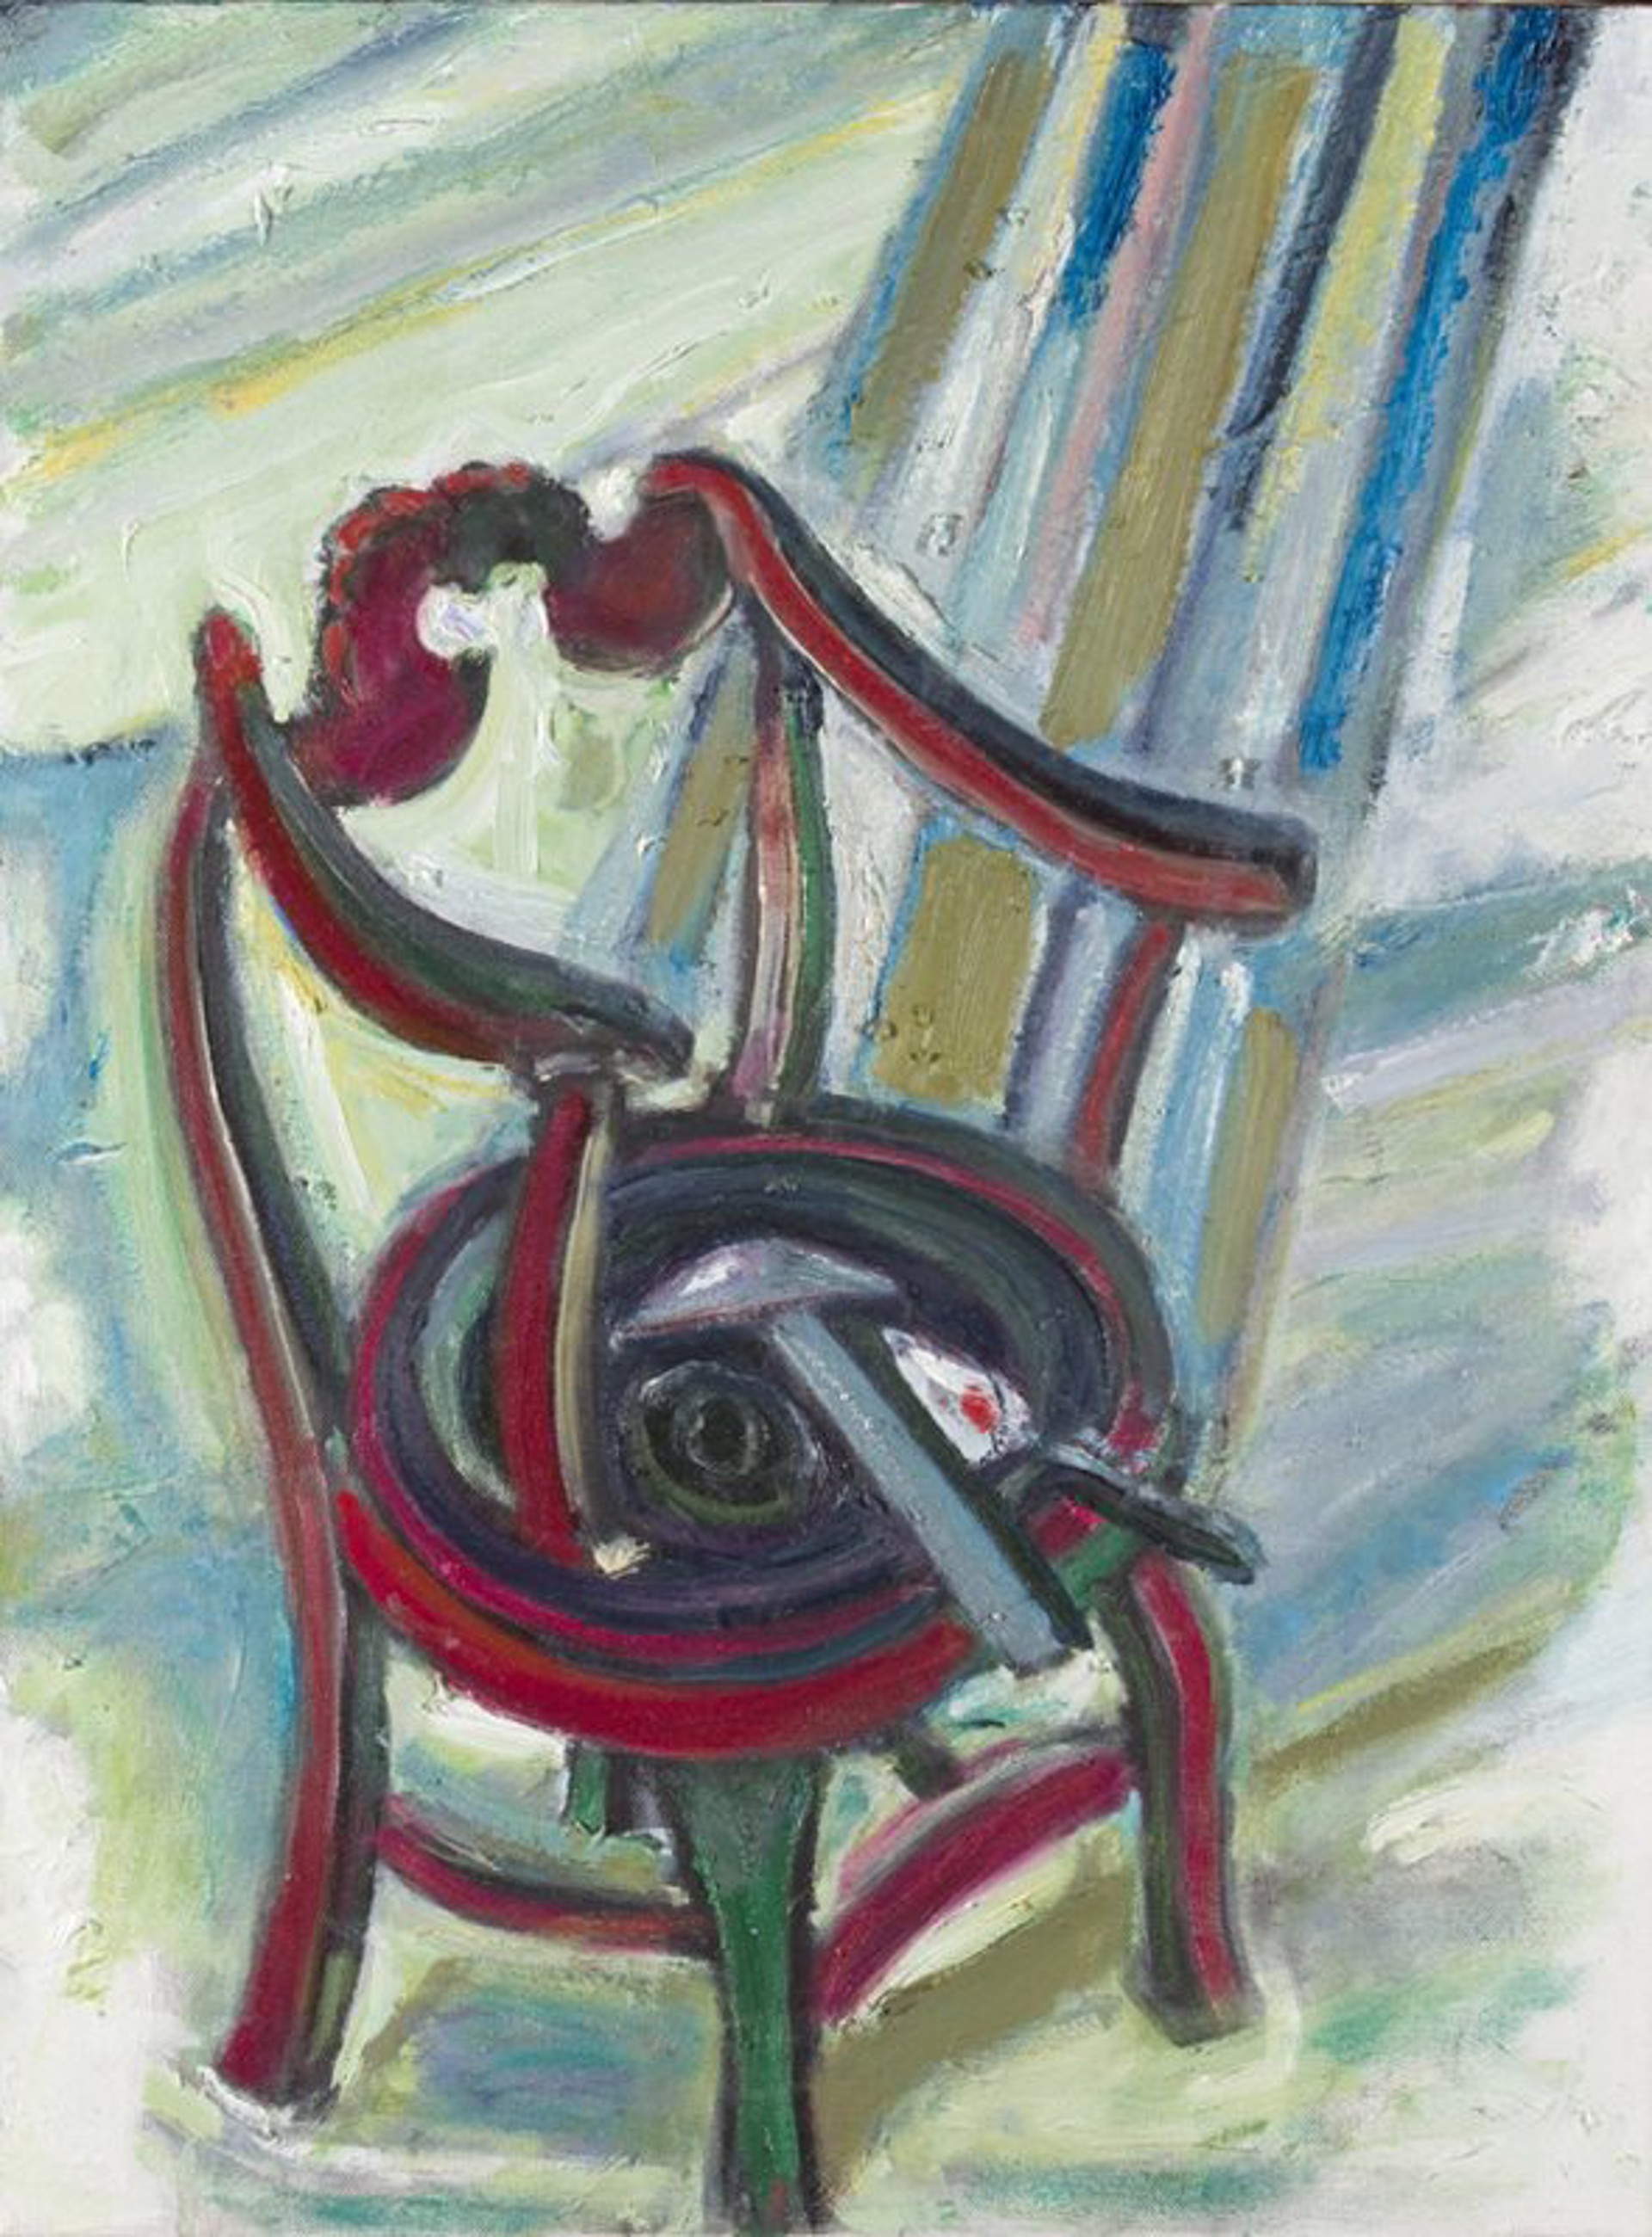 Tools on a Chair by Bernard Chaet